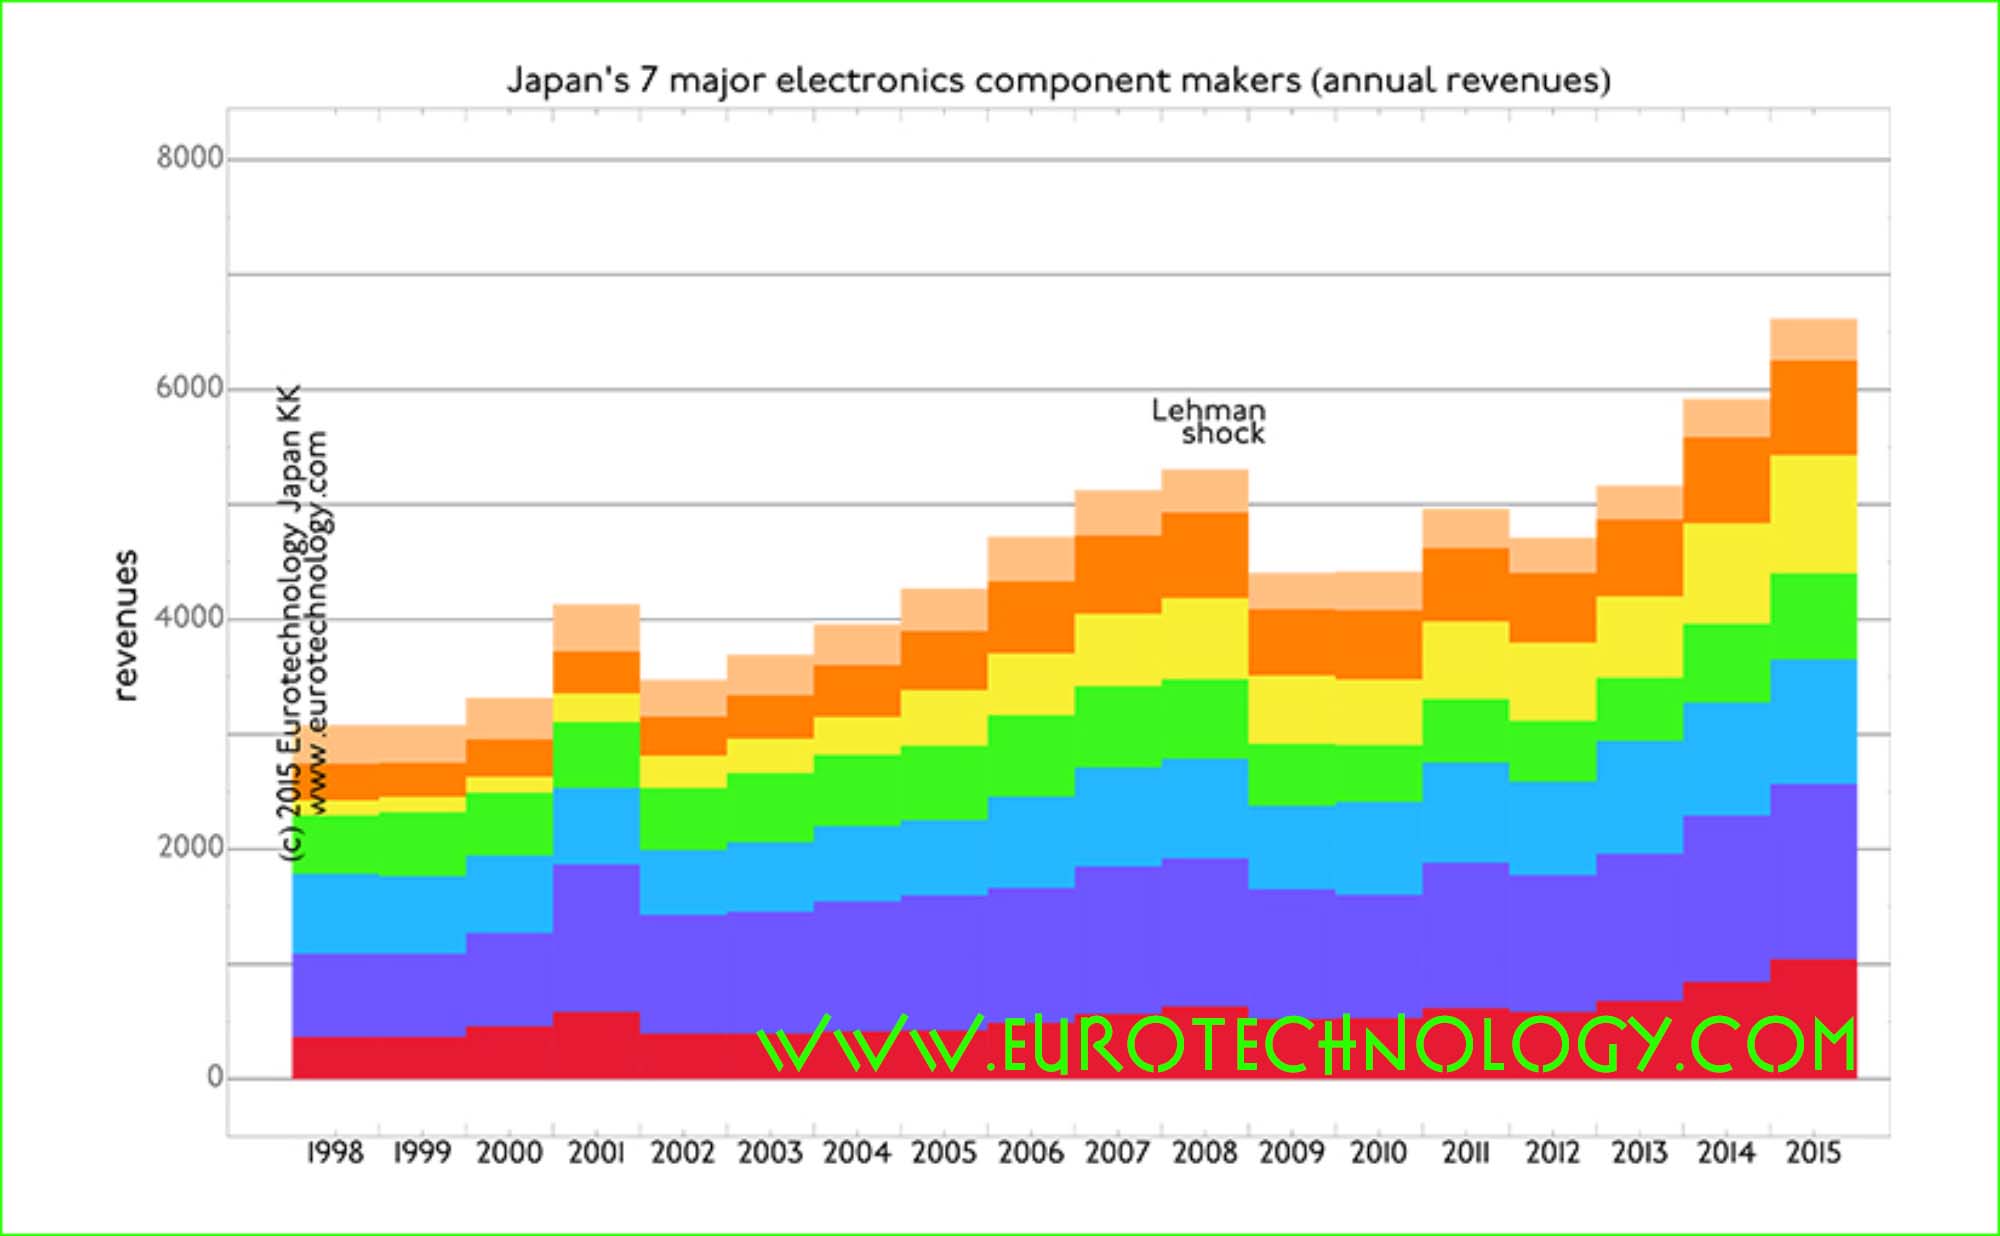 Japanese electronics parts makers grow, while Japan’s iconic electronics makers stagnate